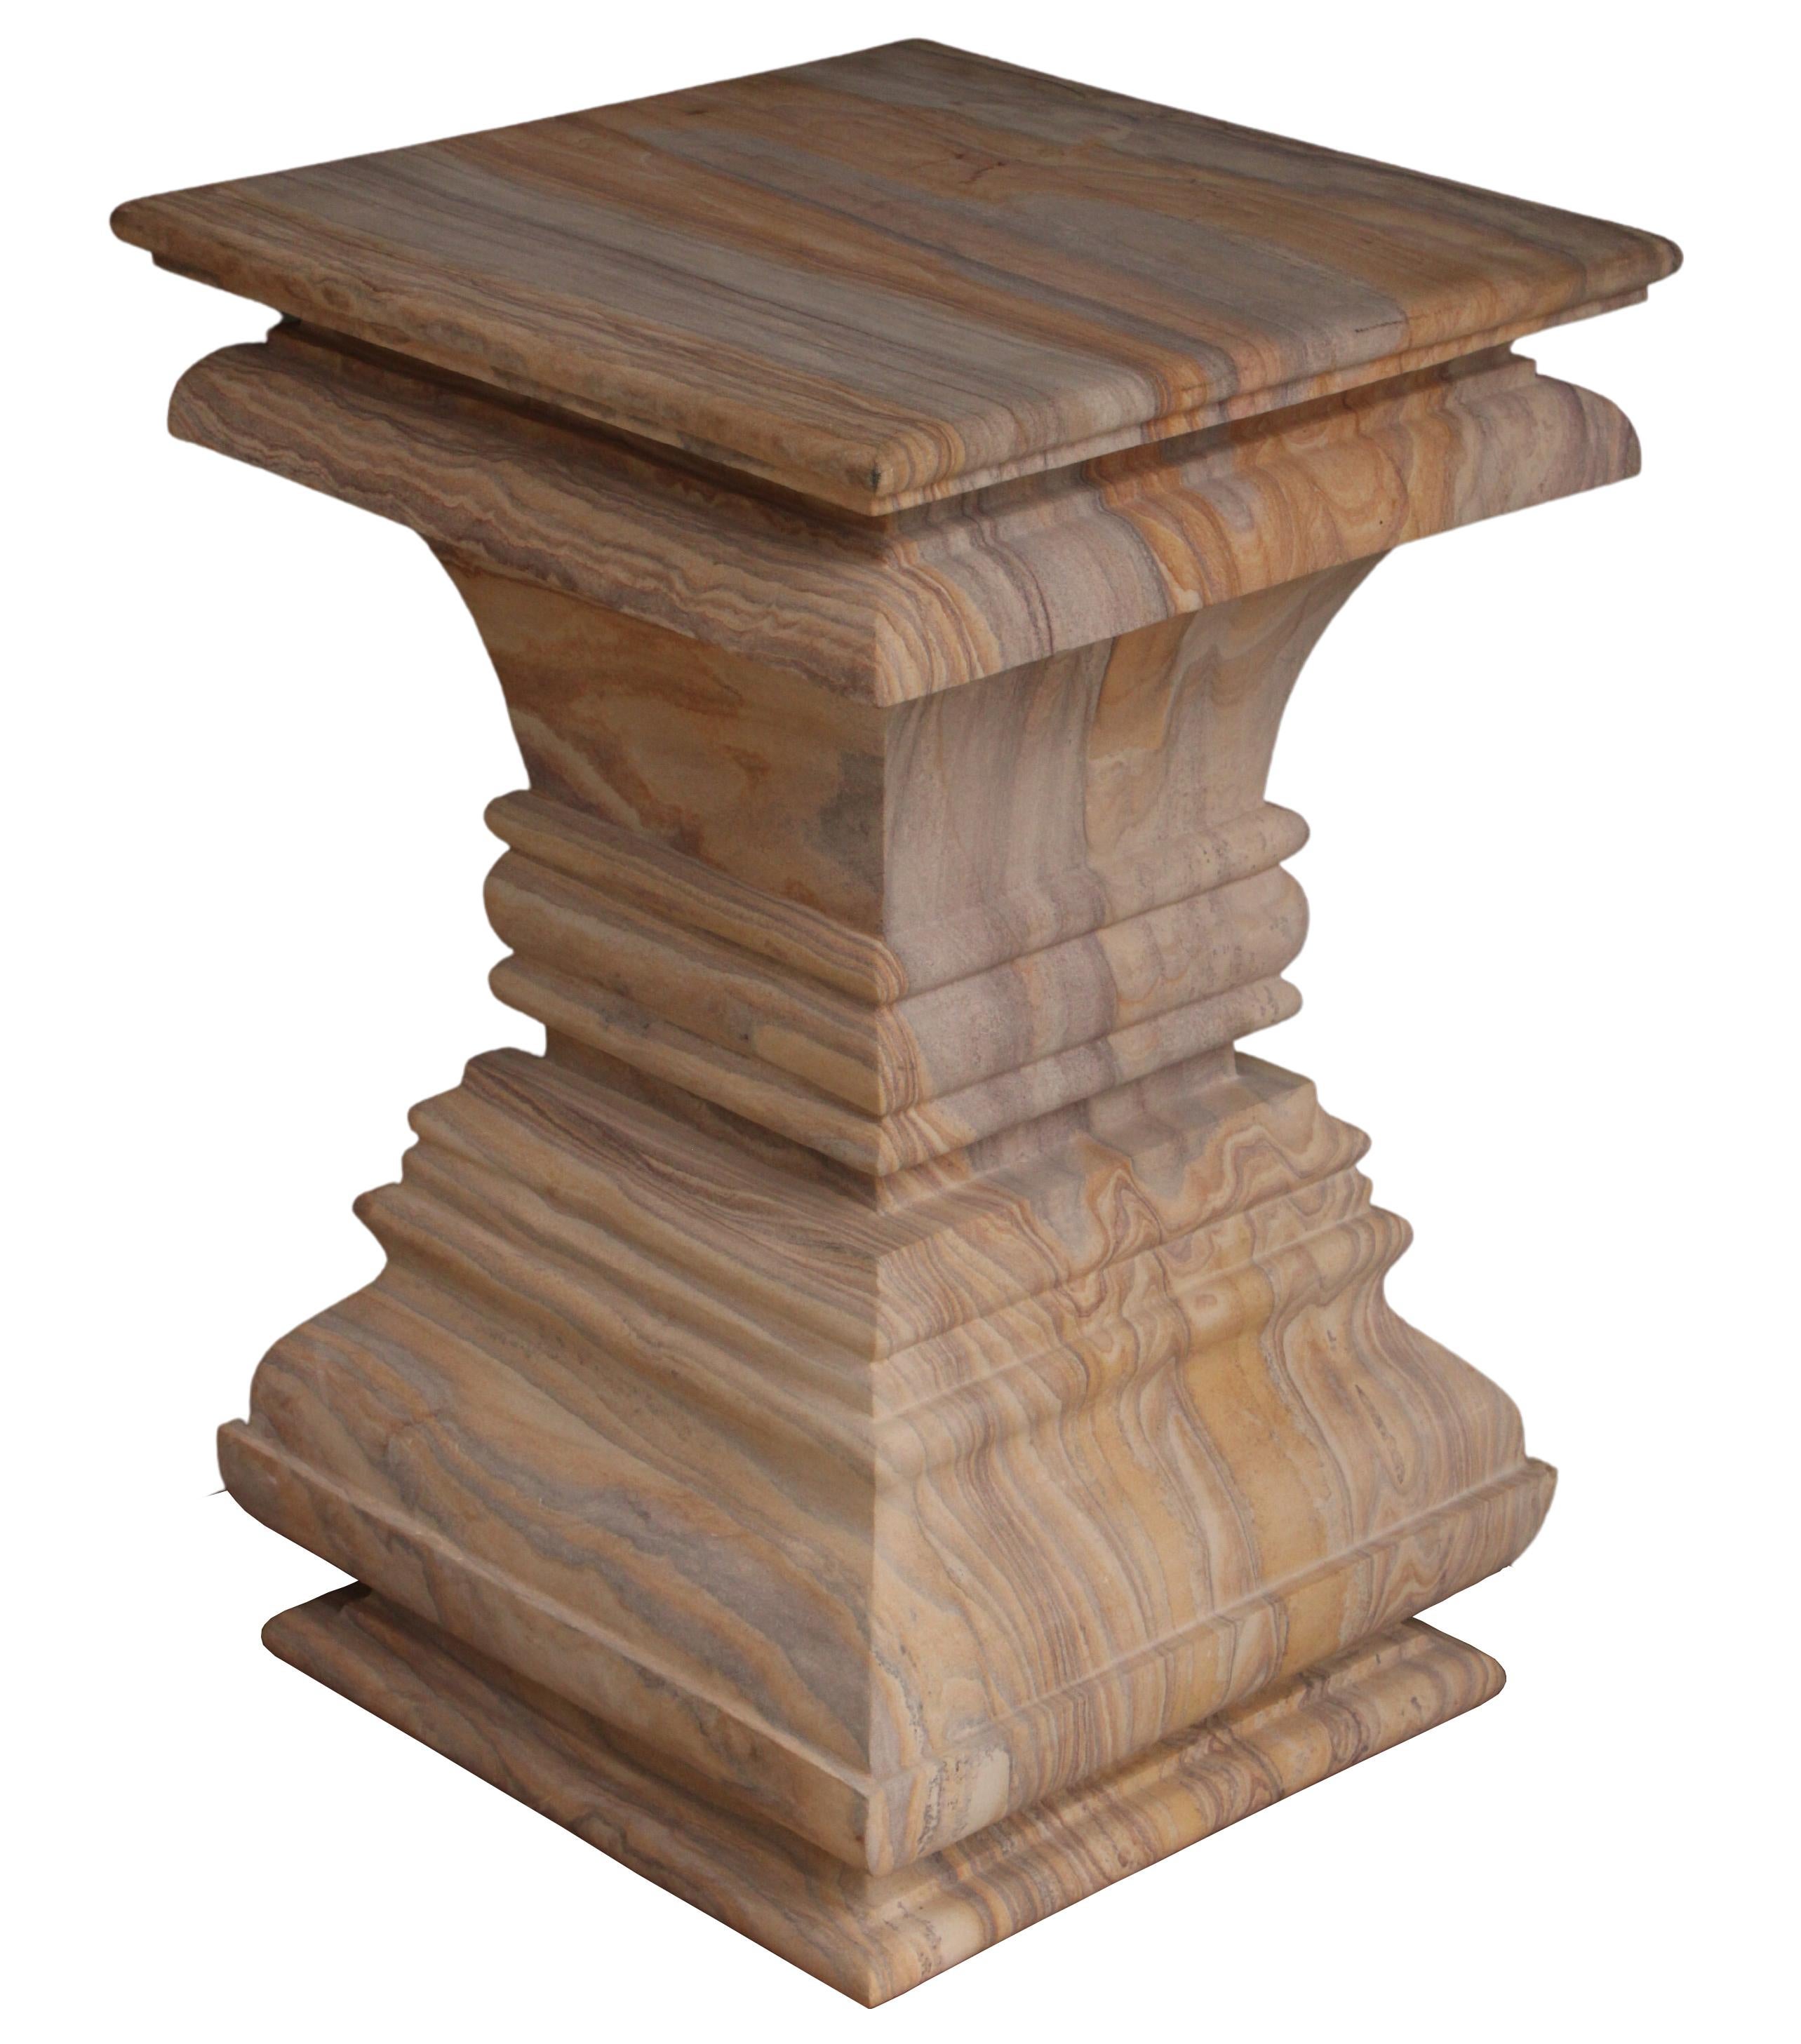 Contemporary Modern Square Architectural Pedestal Side Table in Rainbow Teakwood Stone For Sale